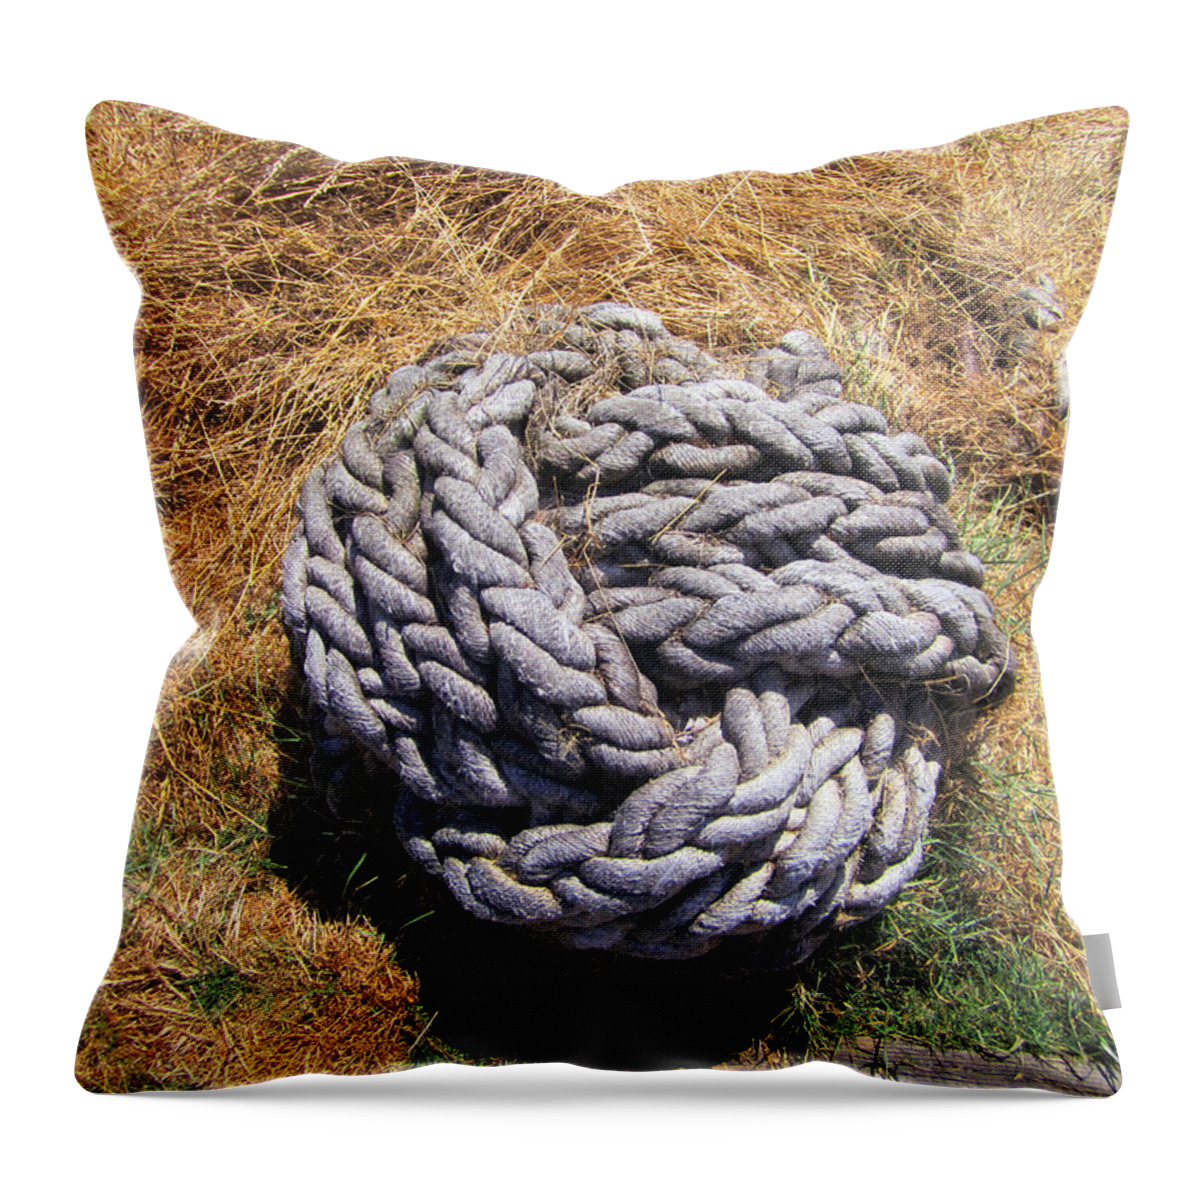 Rock In Rope Throw Pillow featuring the photograph Rock N Rope by Kym Backland